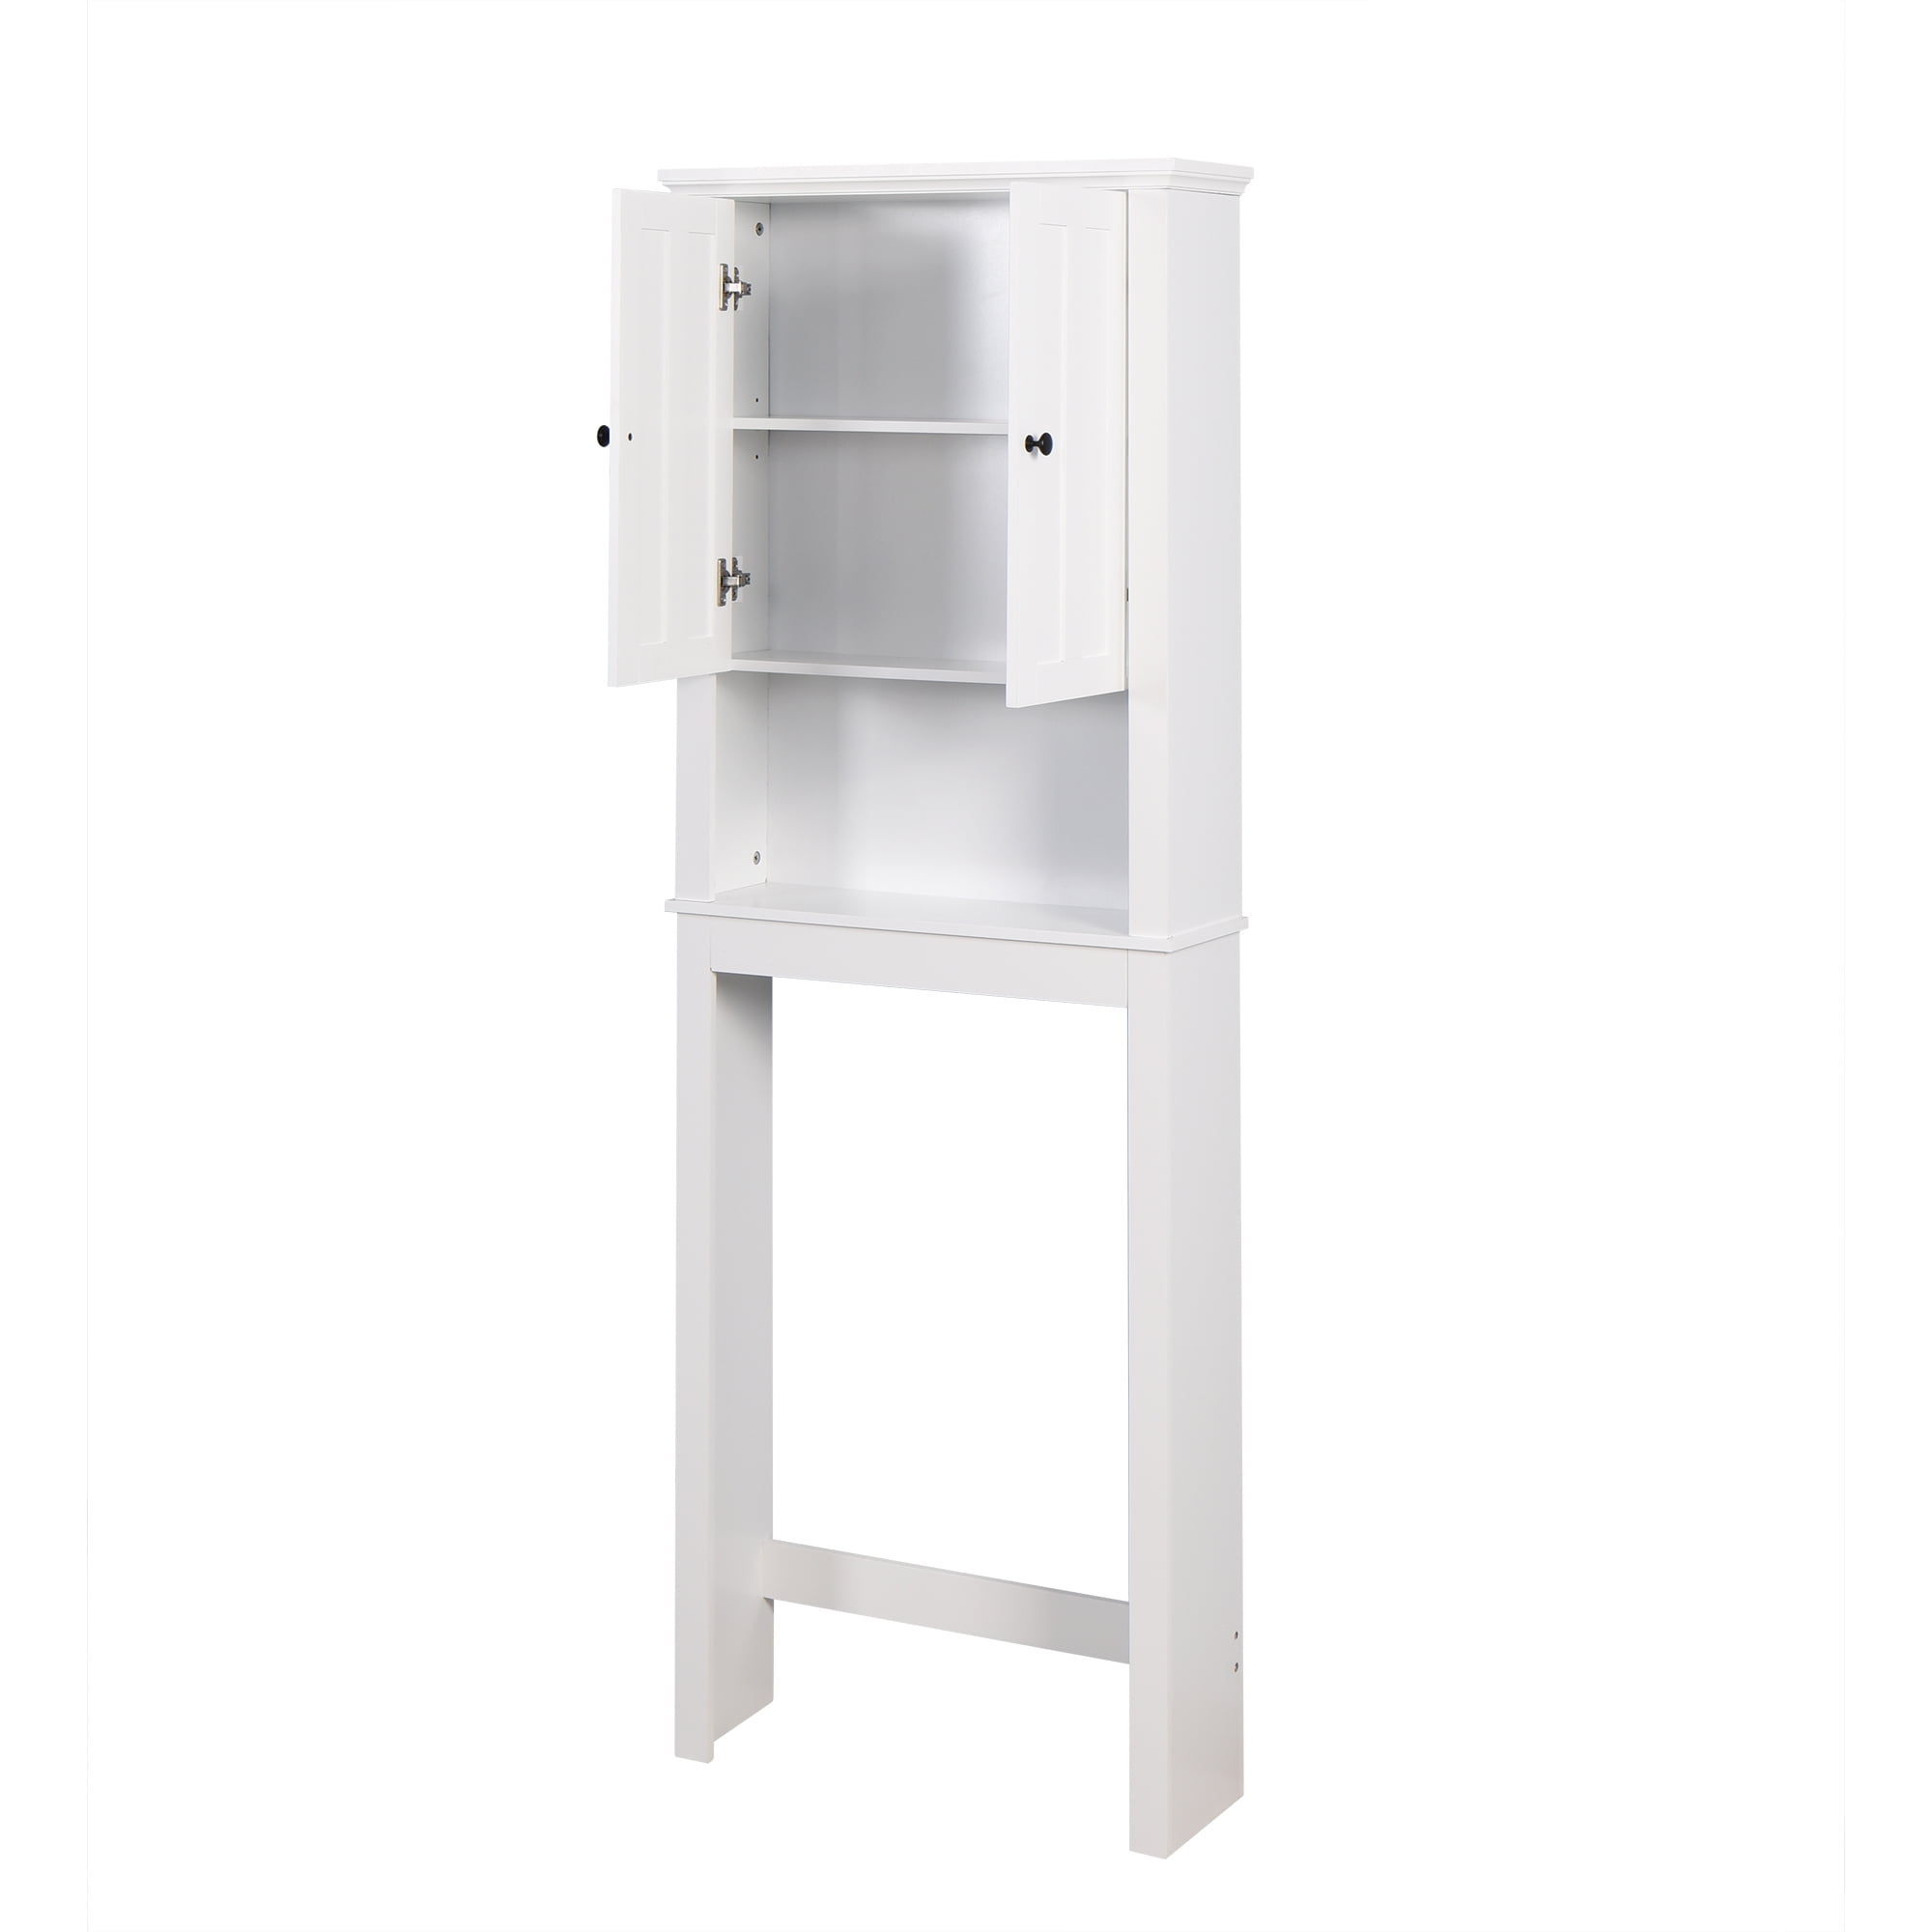 TuoxinEM Small Bathroom Storage Cabinet for Small Spaces, Over The Toilet  Storage Cabinet for Skinny Bathroom Storage Corner Floor, Slim Toilet Paper Storage  Cabinet with 2 Doors & Shelves (White)